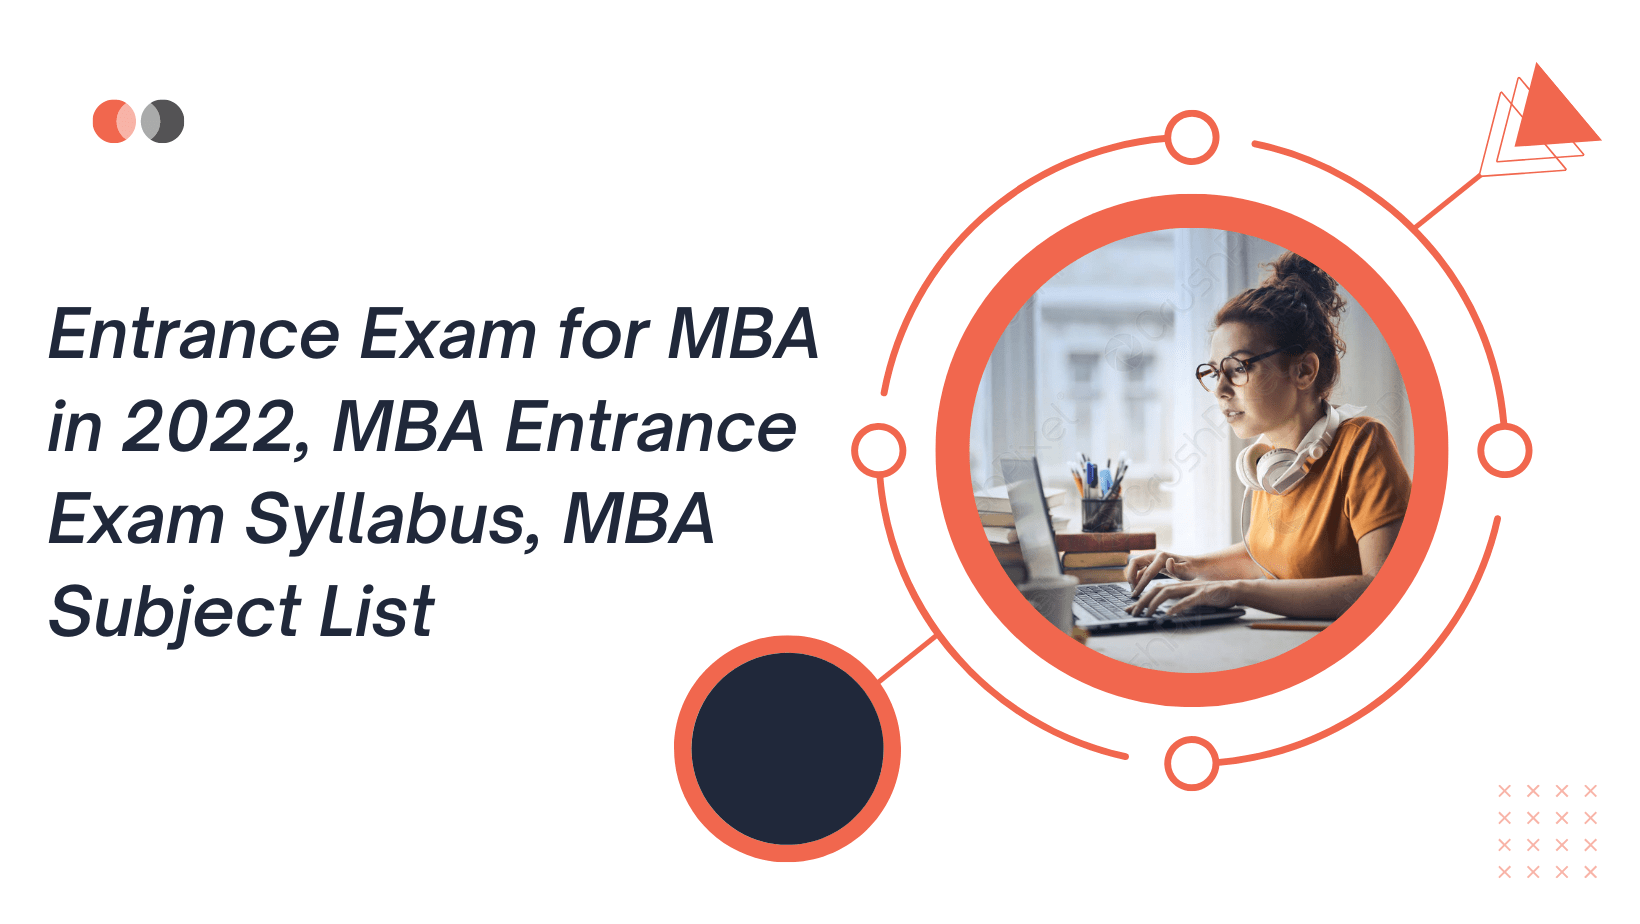 Entrance Exam for MBA in 2022, MBA Entrance Exam Syllabus, MBA Subject List -